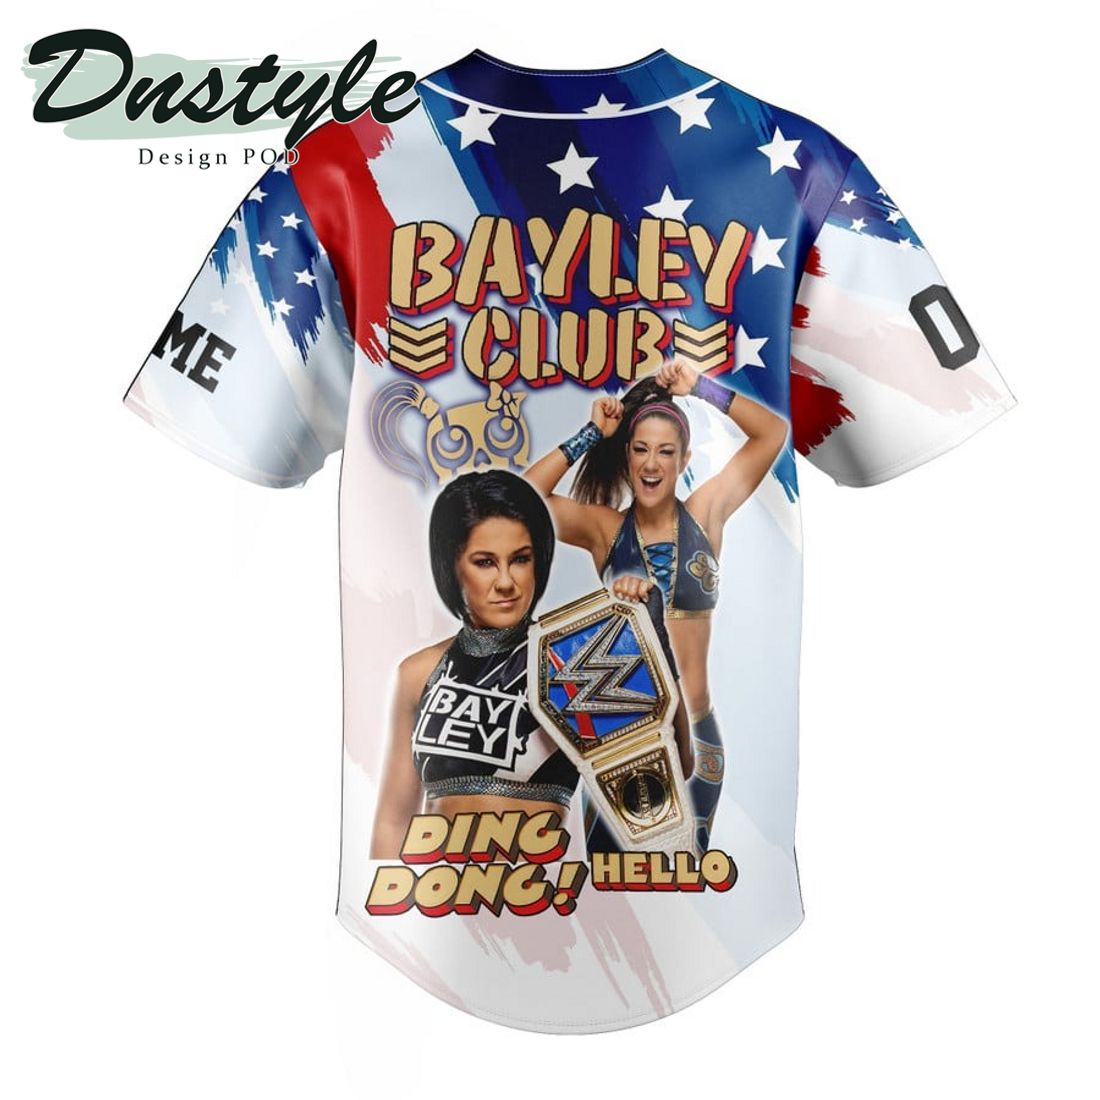 Bayley Club Ding Dong Hello Custom Name And Number Baseball Jersey